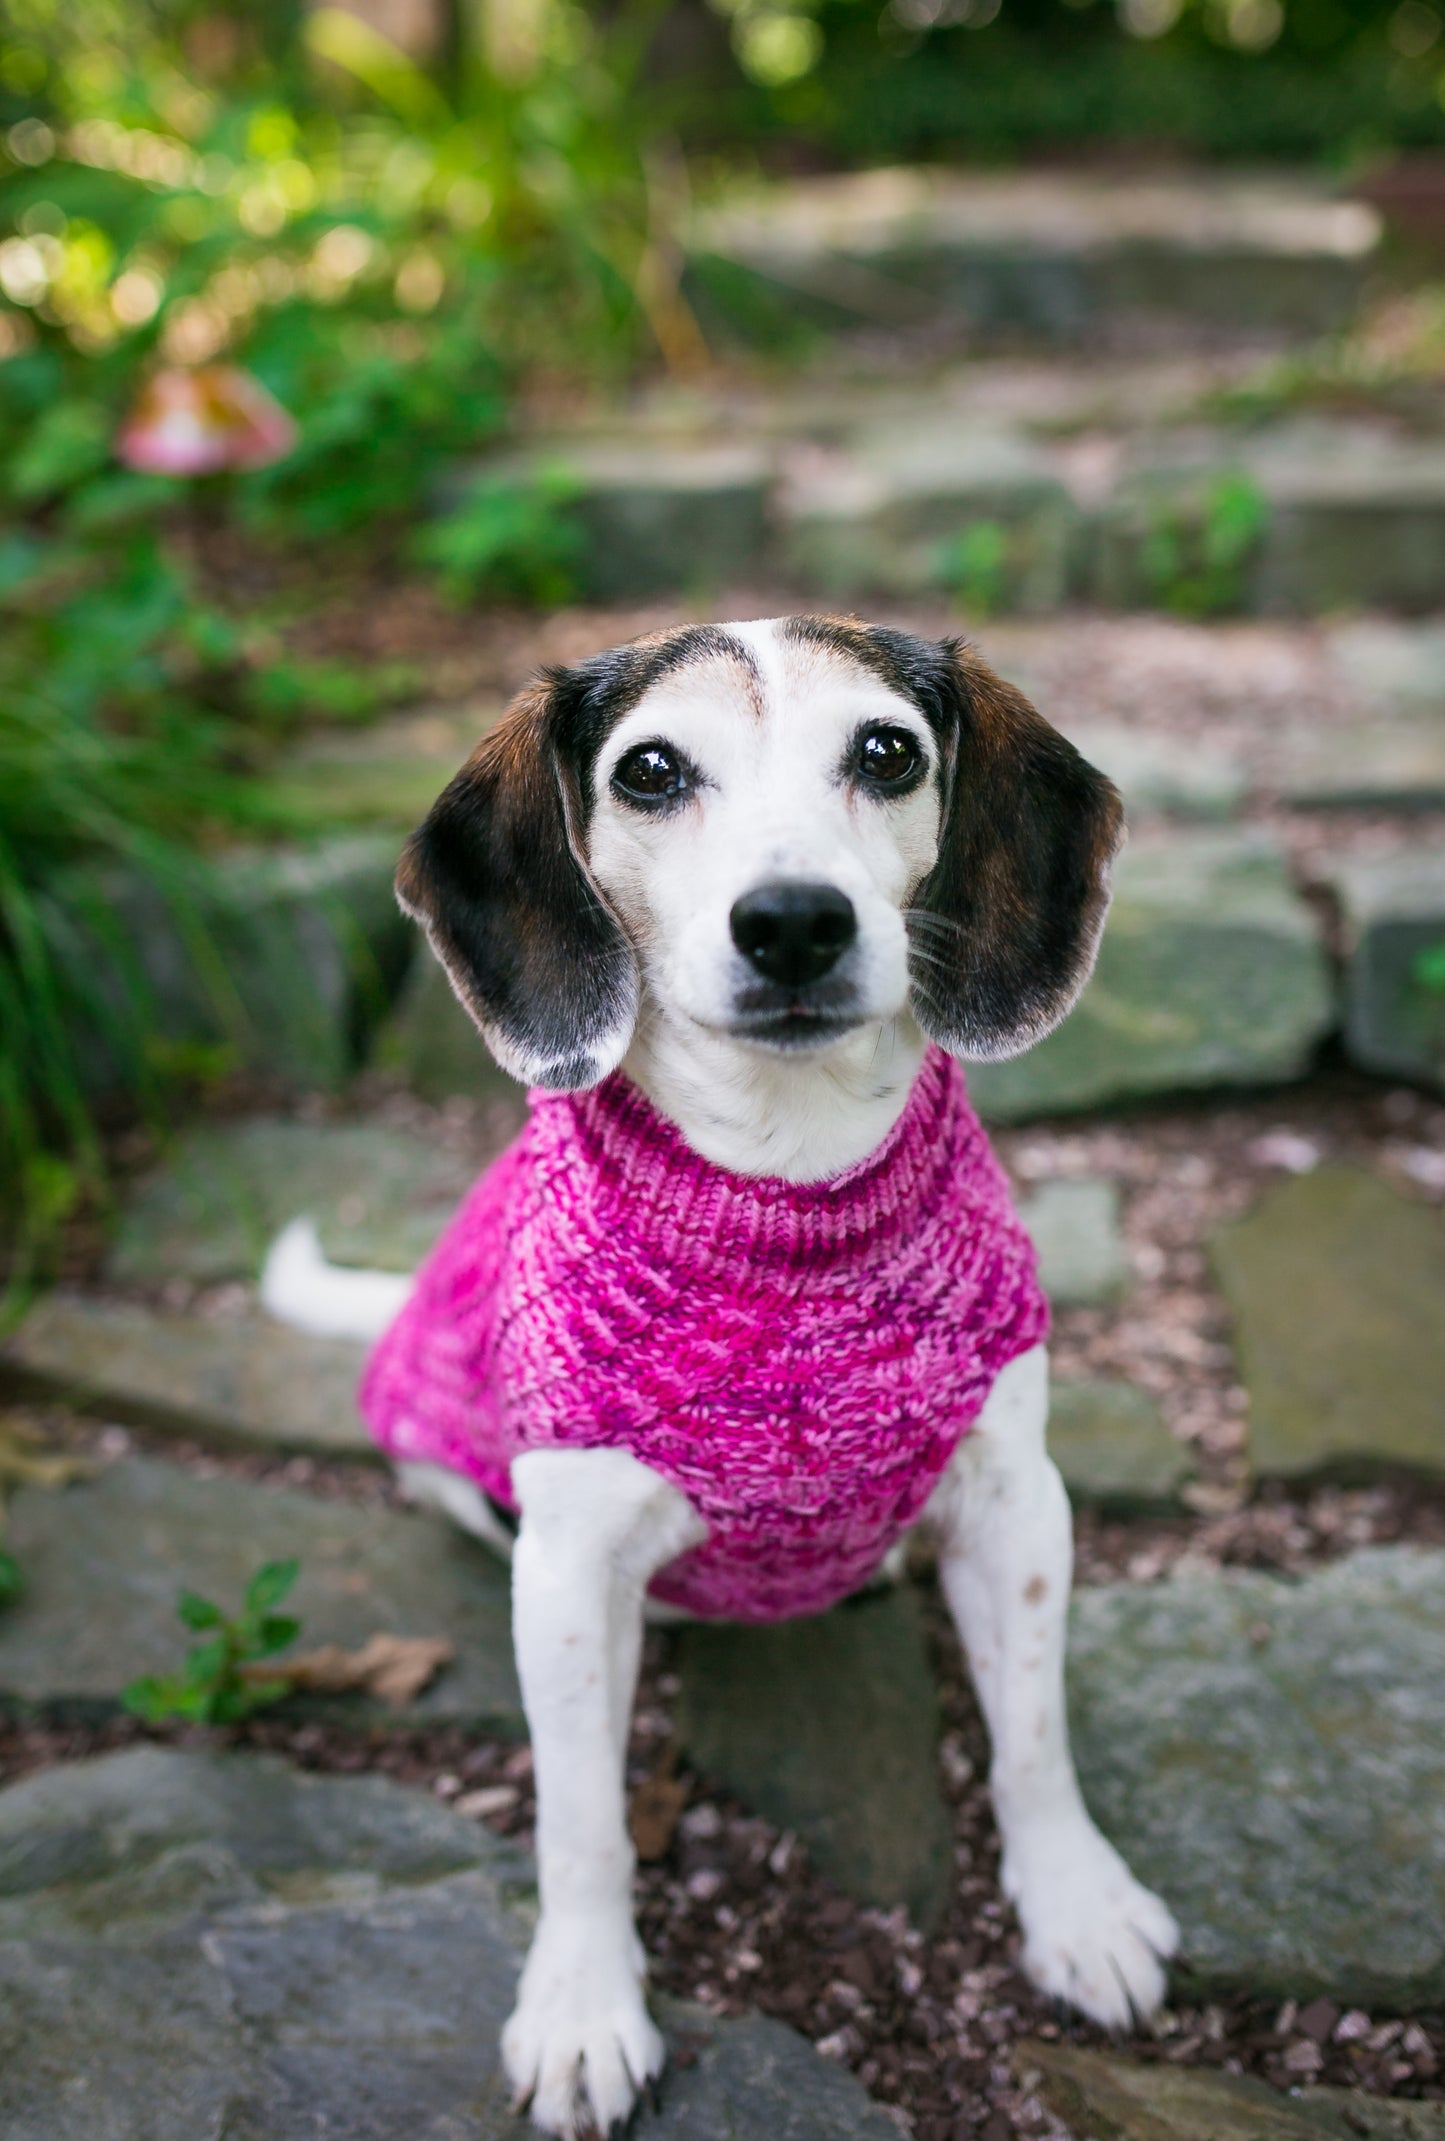 Cat & Dog Pet Sweaters in Tickled Pink - VERY LIMITED QUANTITY AND LAST OF THIS COLORWAY!